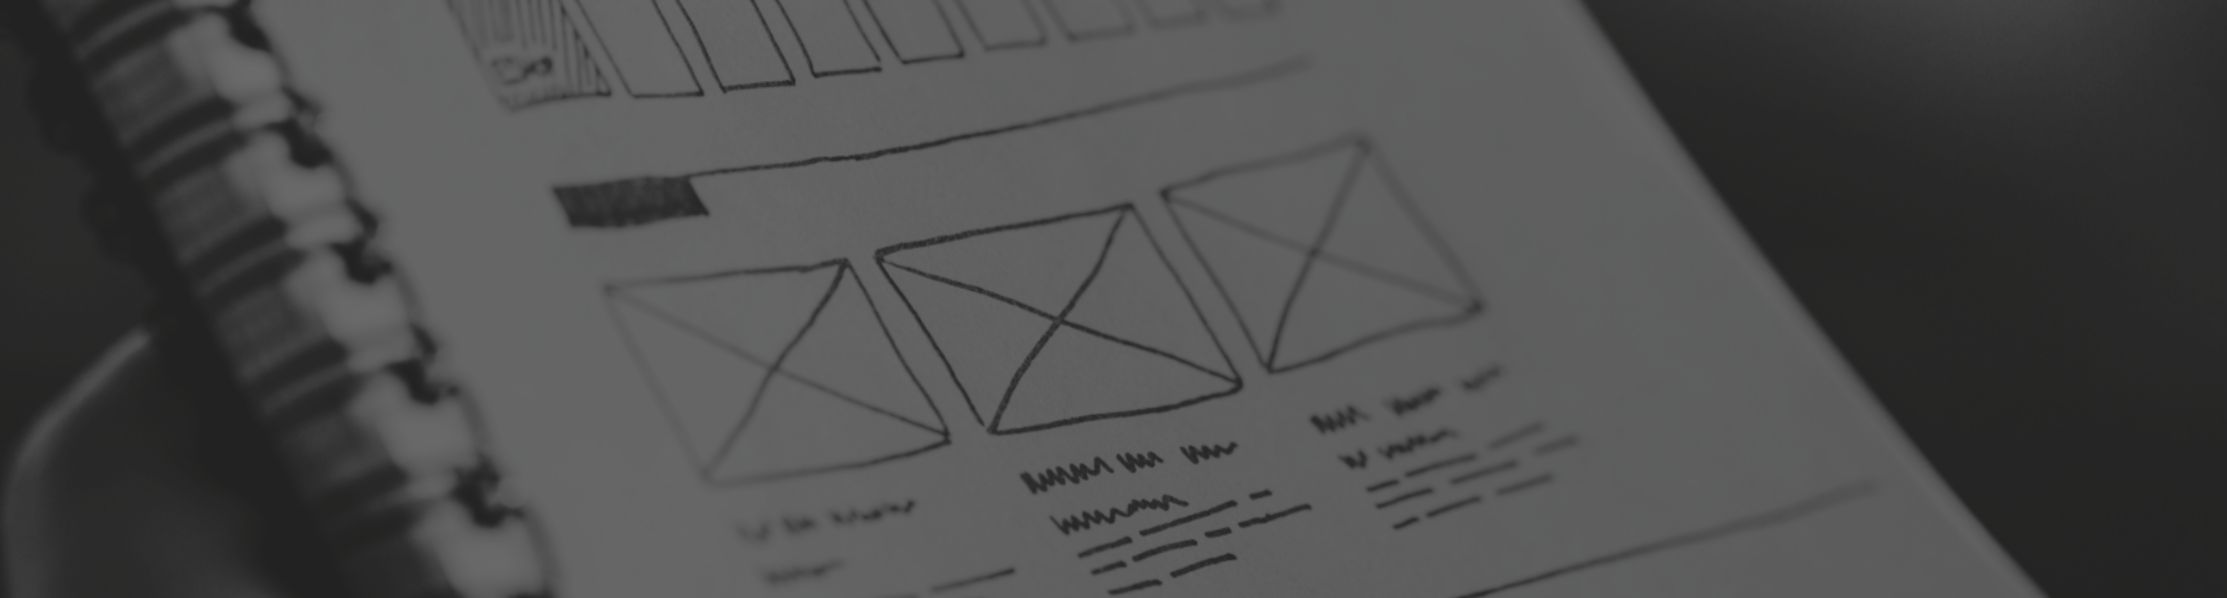 Image showing a website wireframe being sketched on a notepad